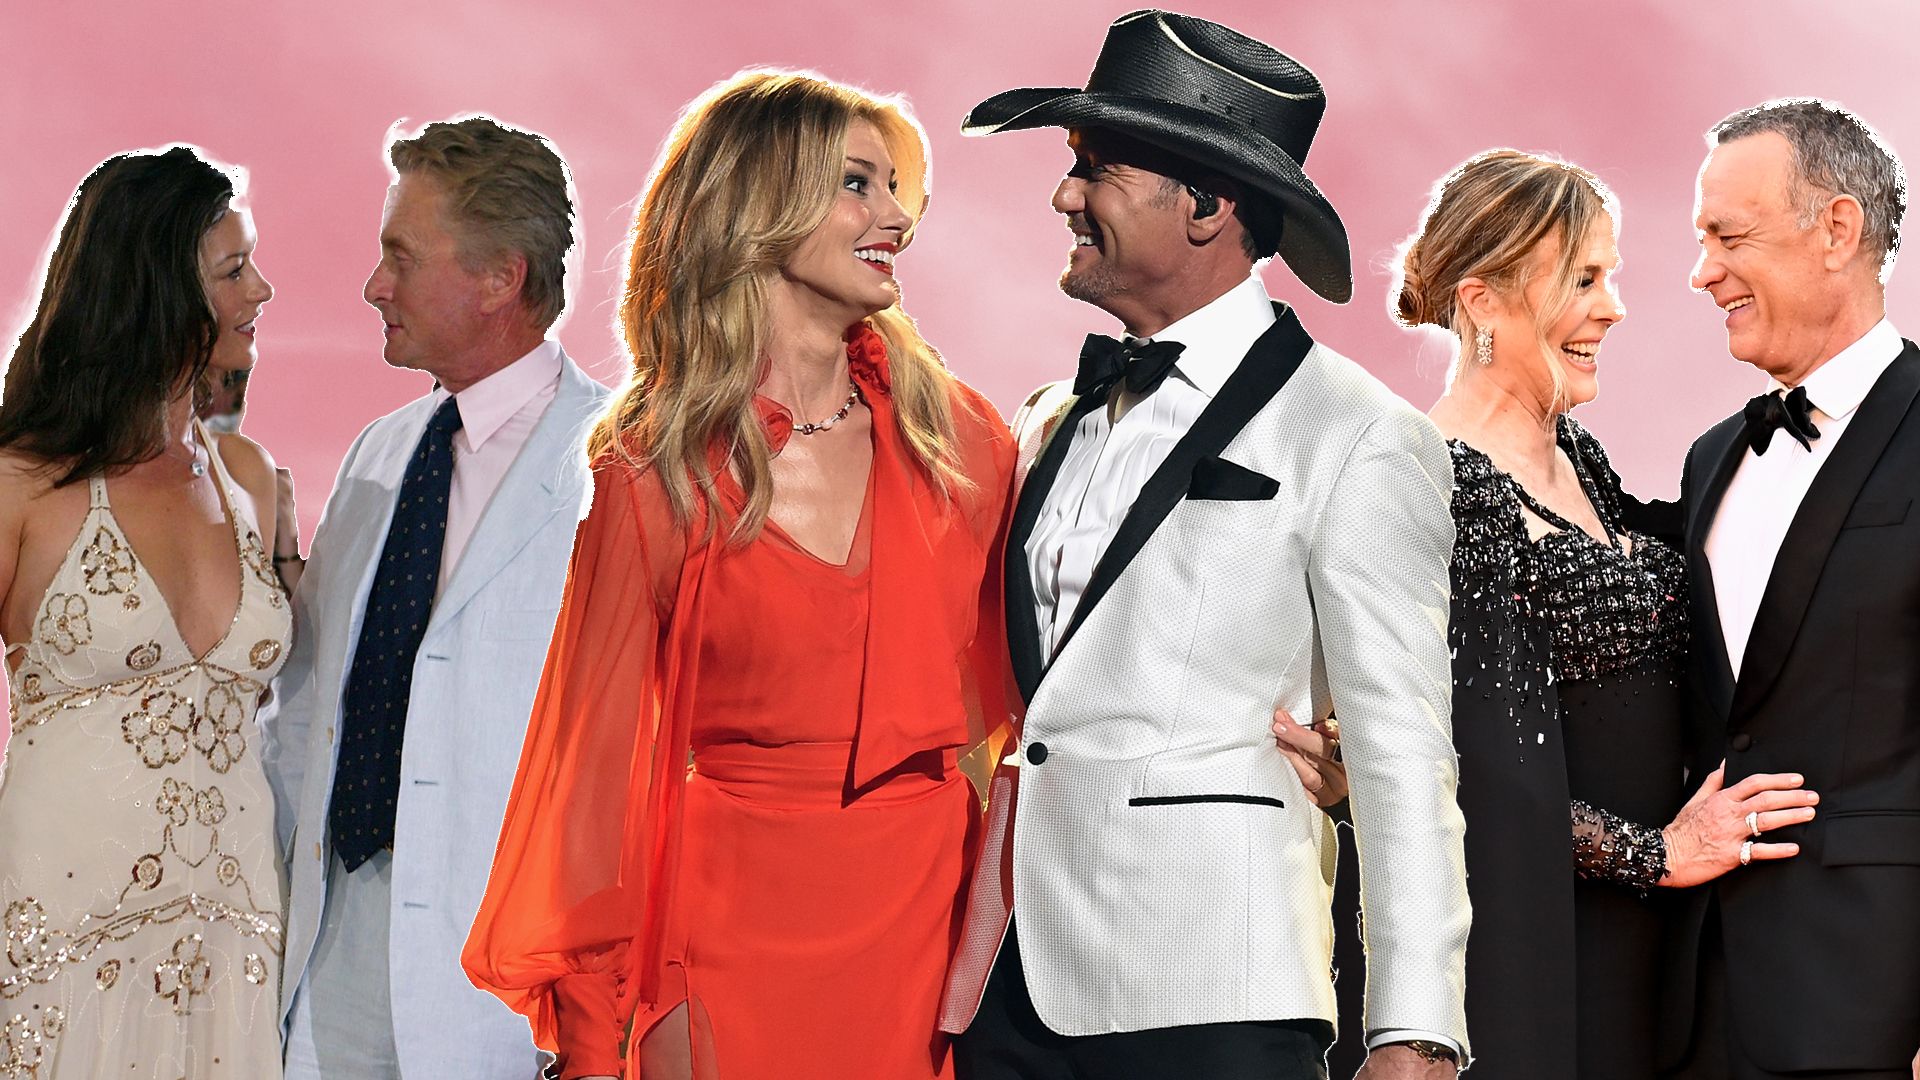 Catherine-Zeta Jones and Michael Douglas, Faith Hill and Tim McGraw and Rita Wilson and Tom Hanks looking lovingly at their partners